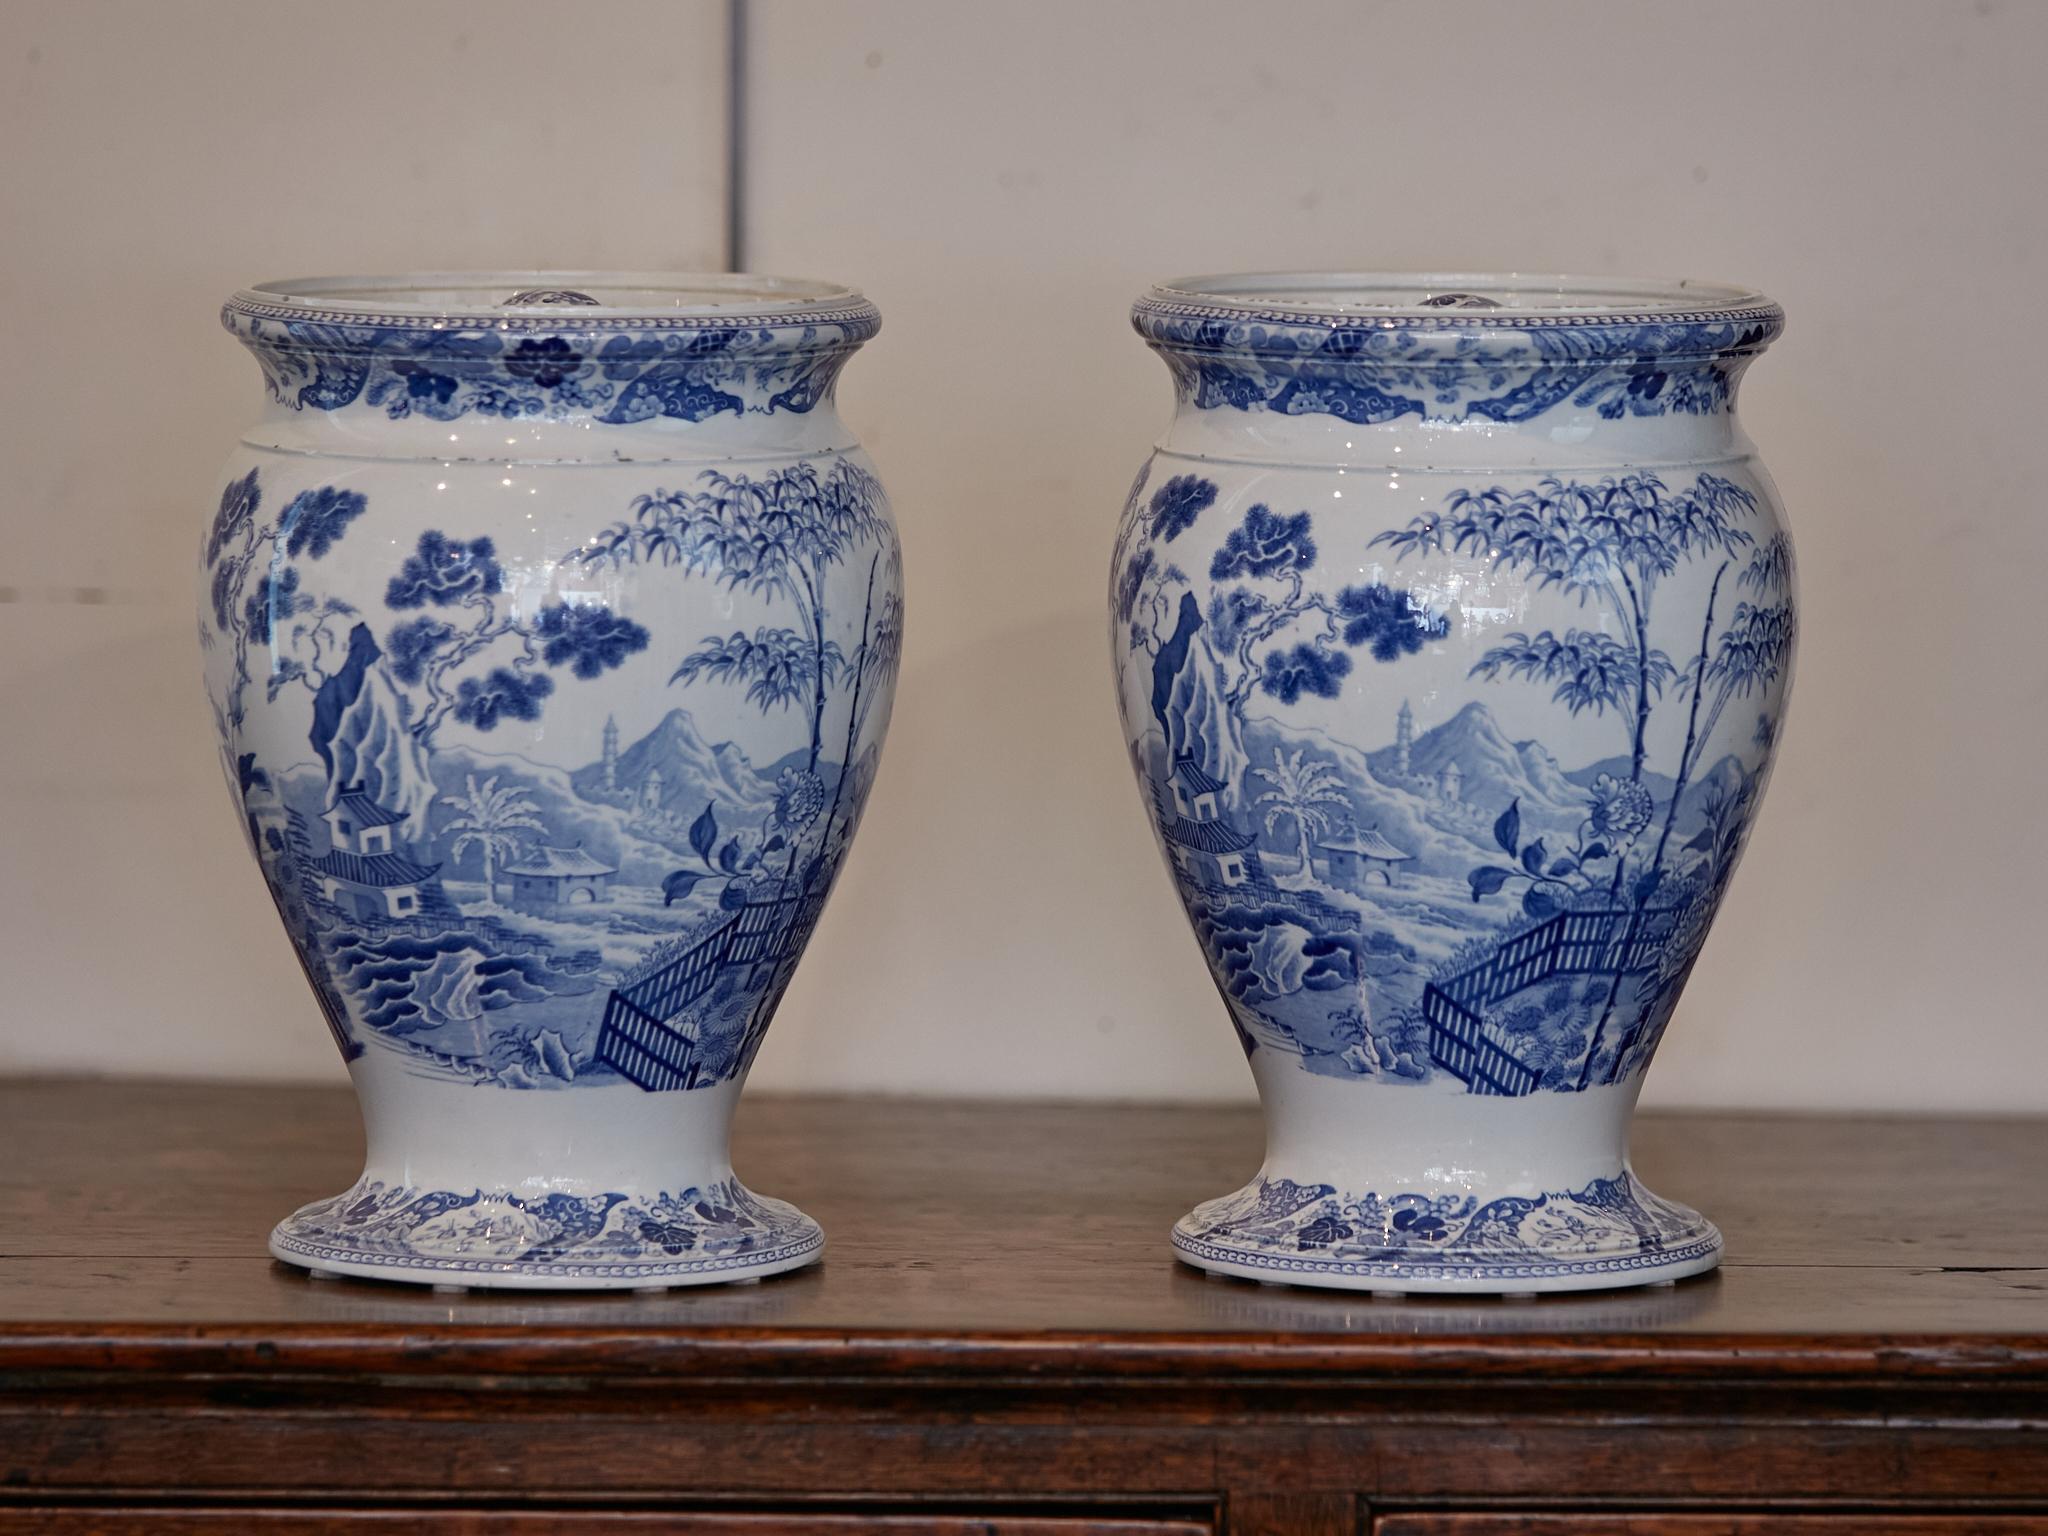 19th Century English Wedgwood Blue Palissade Lidded Urns with Chinoiserie Gardens, a Pair